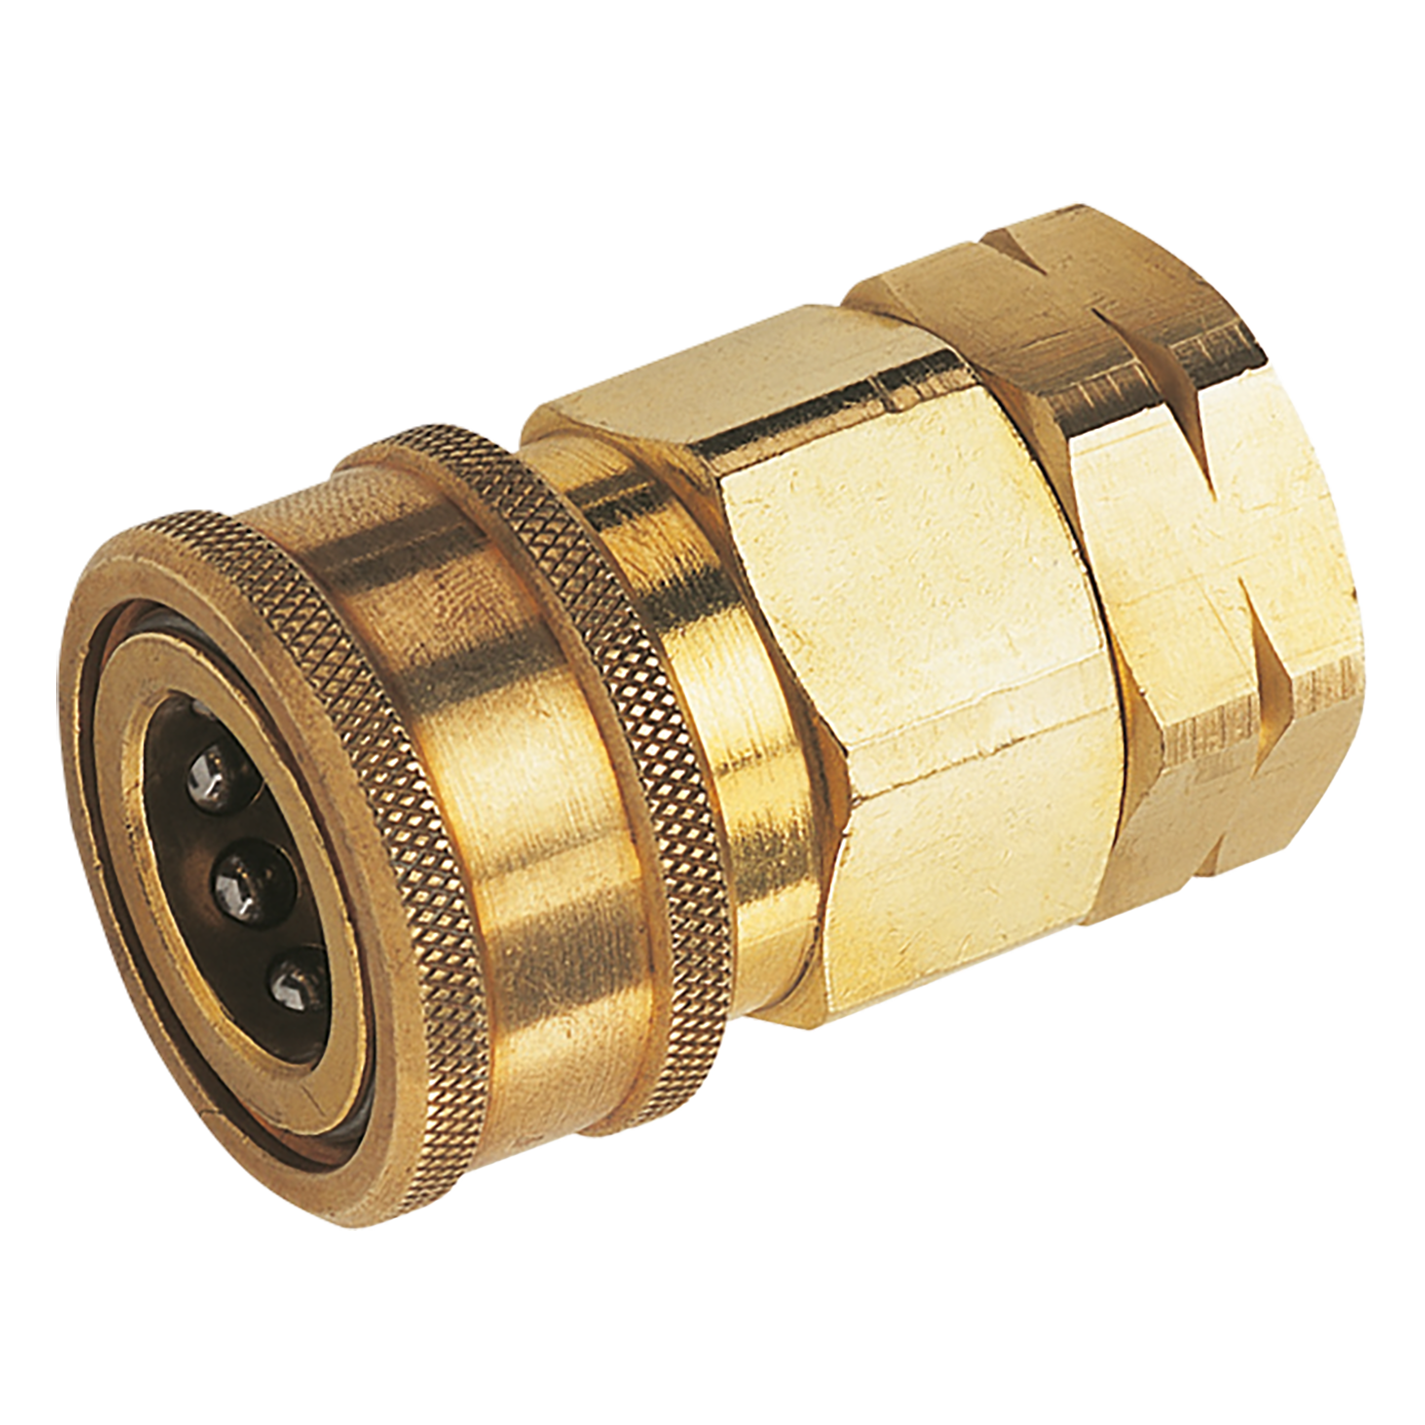 1/2" BSP Female Hydraulic Quick Release Coupling